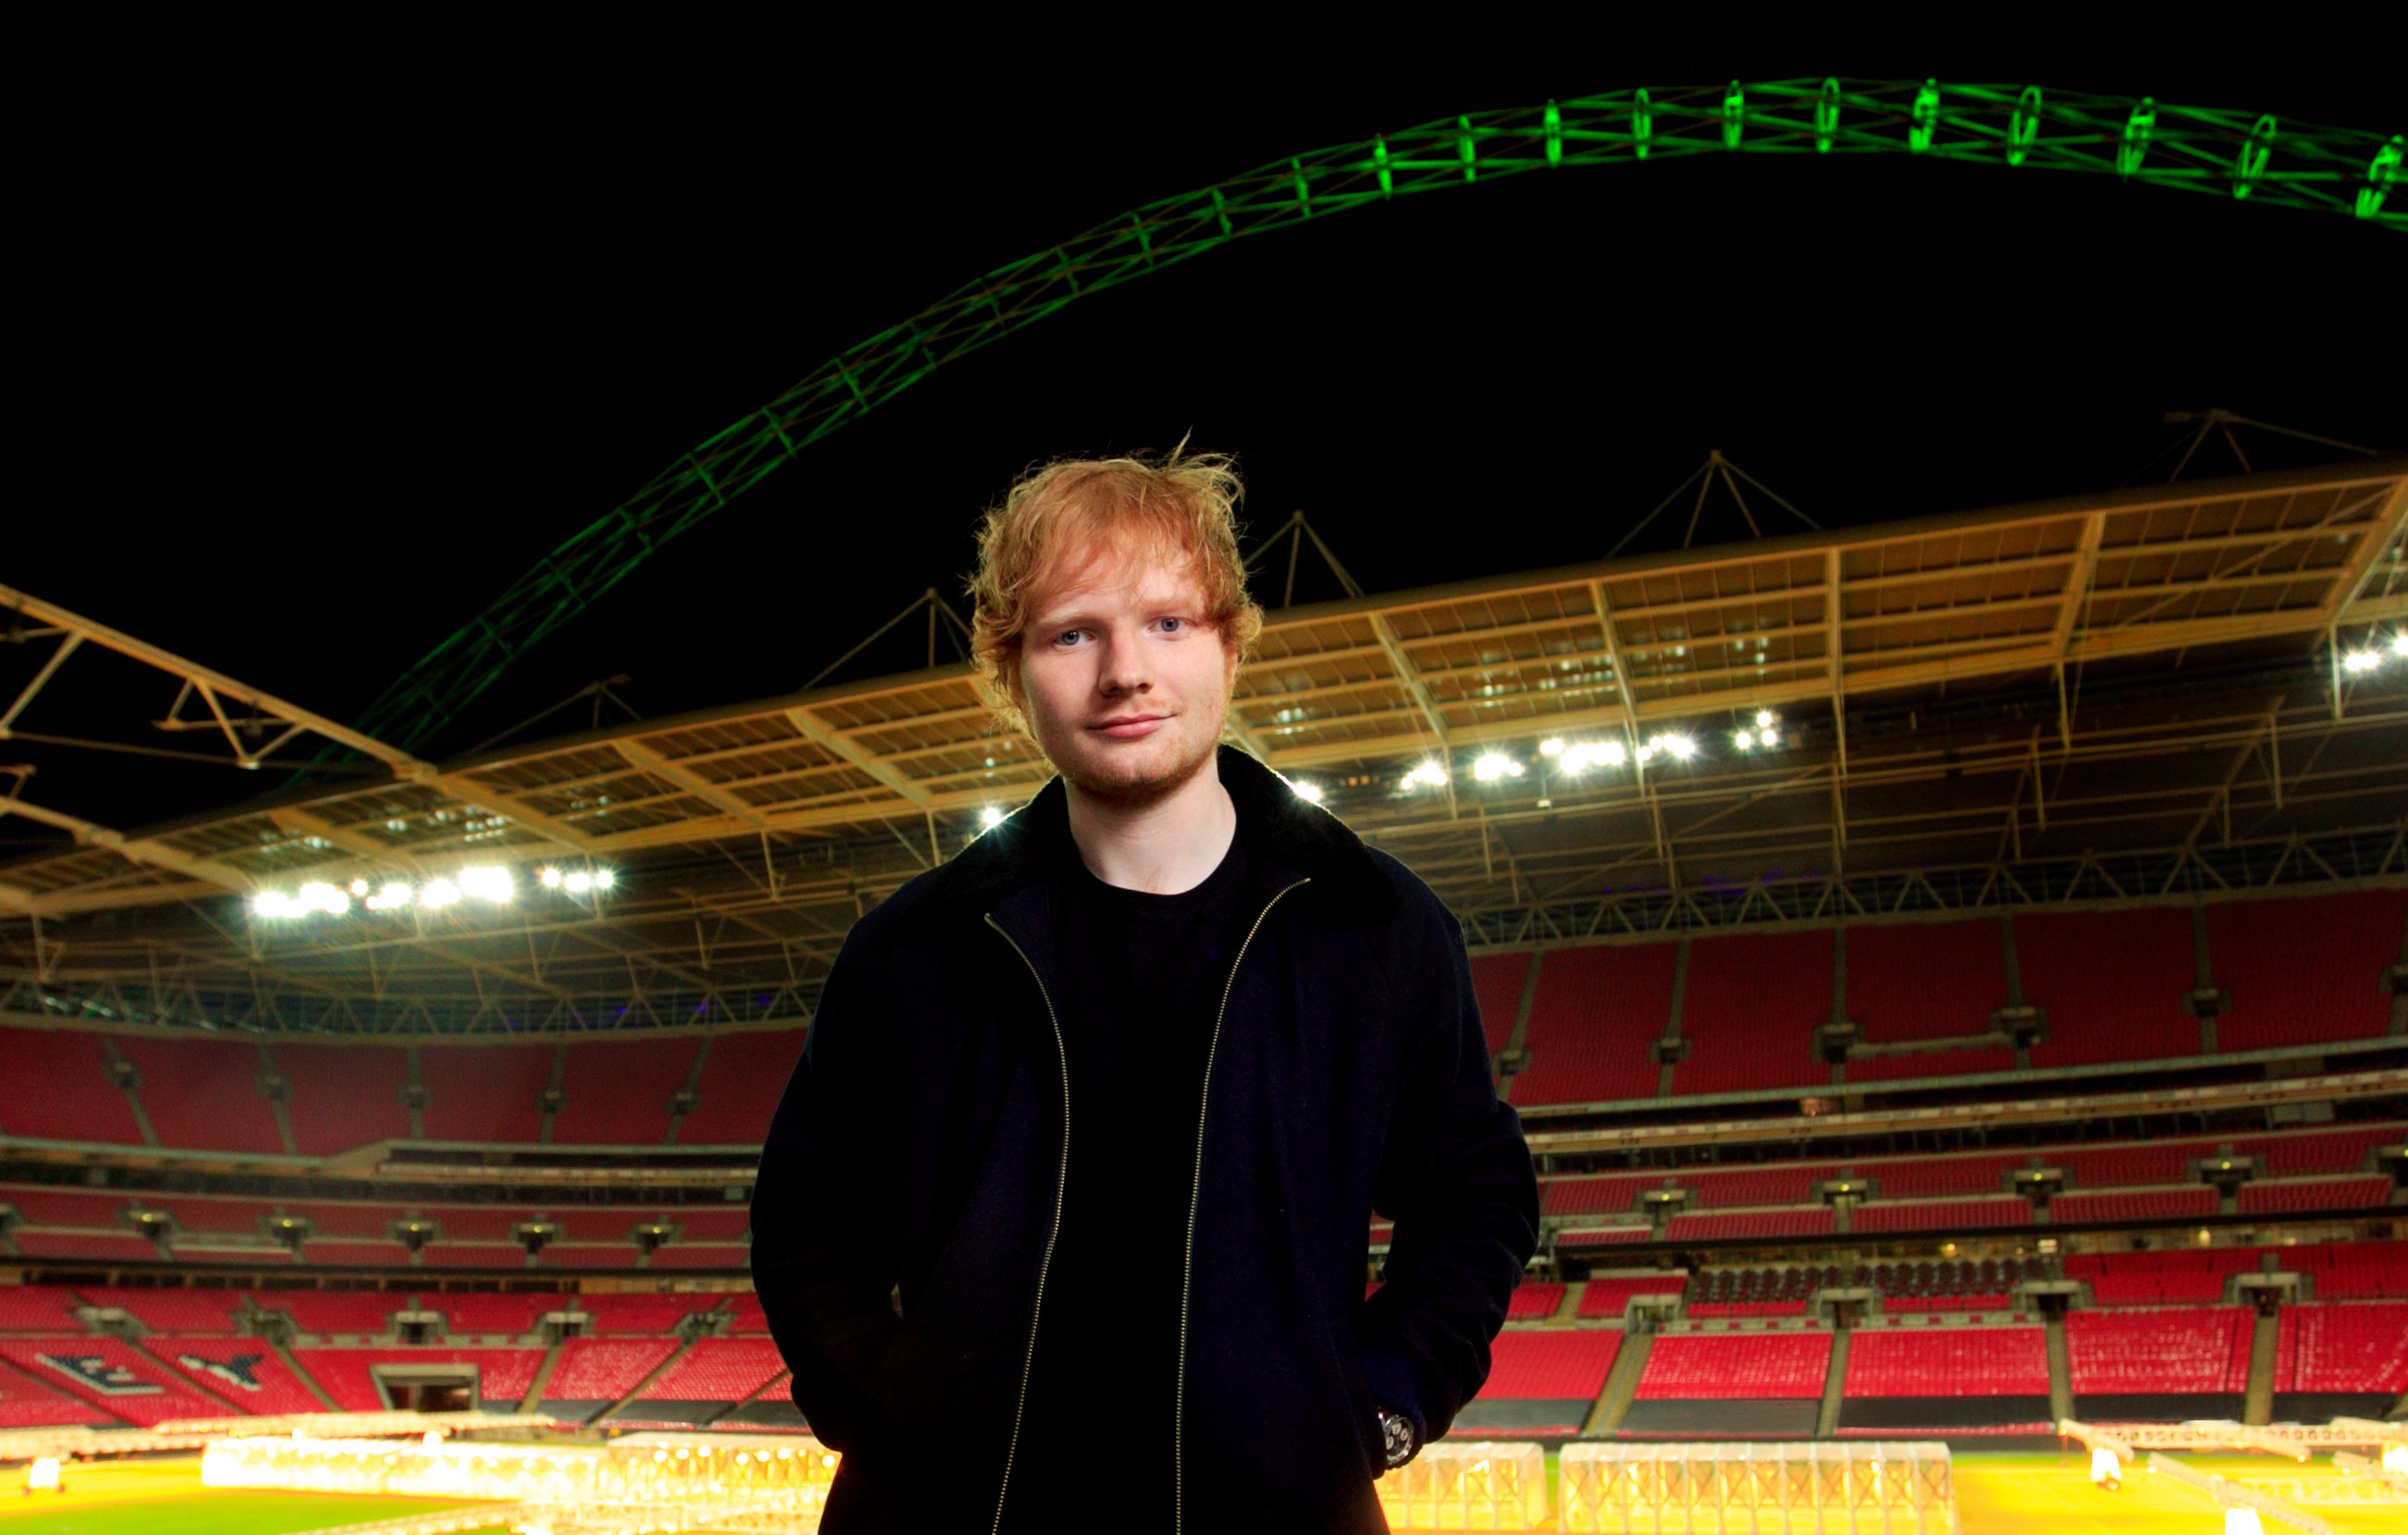 Ed Sheeran stands in front of an empty stadium.